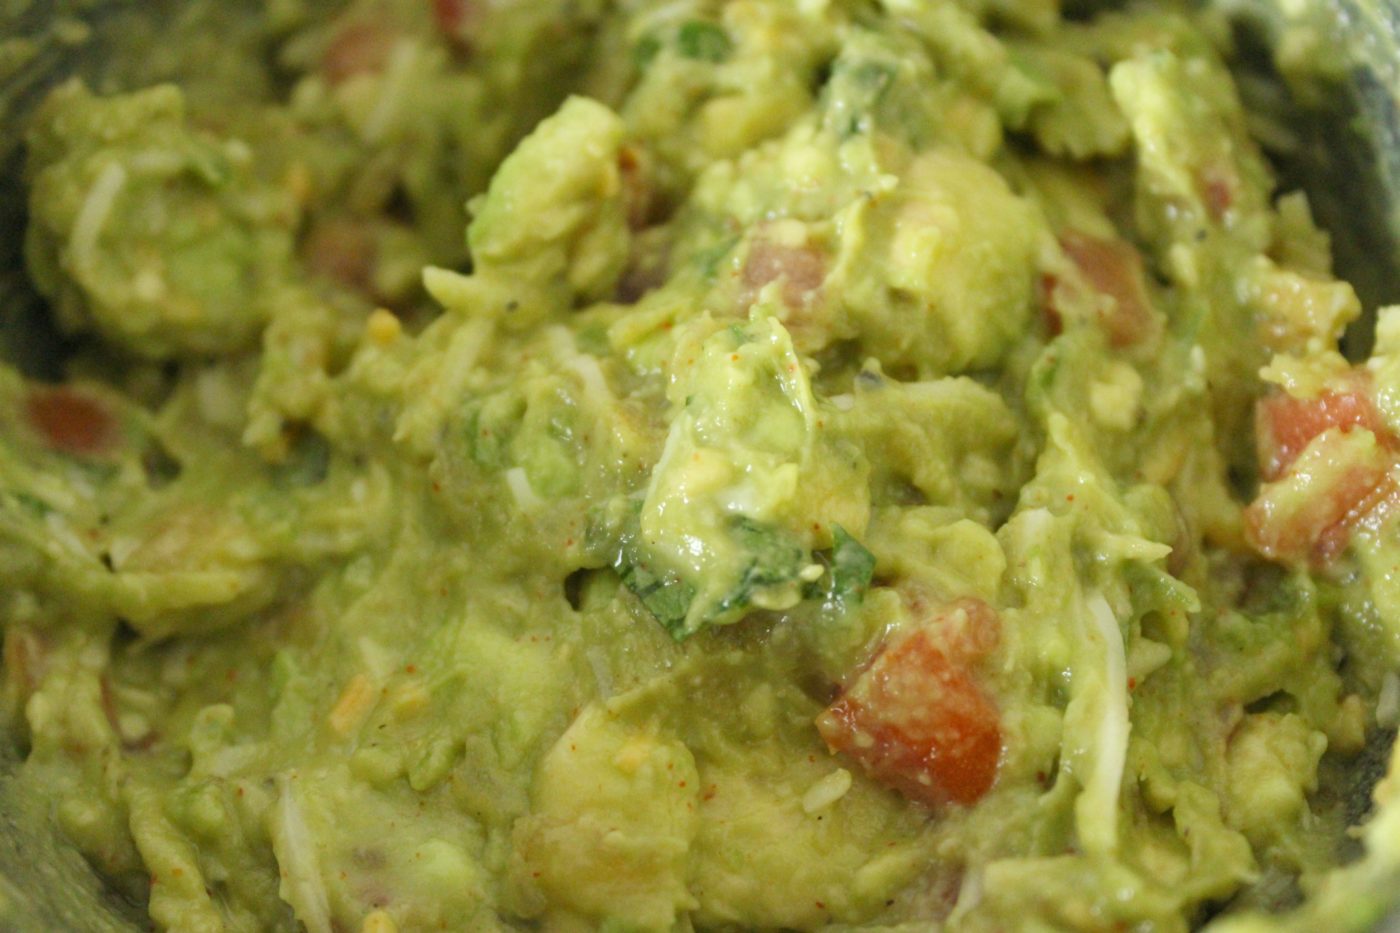 Adding cheese to guacamole may be a no-no but it was a delightful addition to my version of guac.